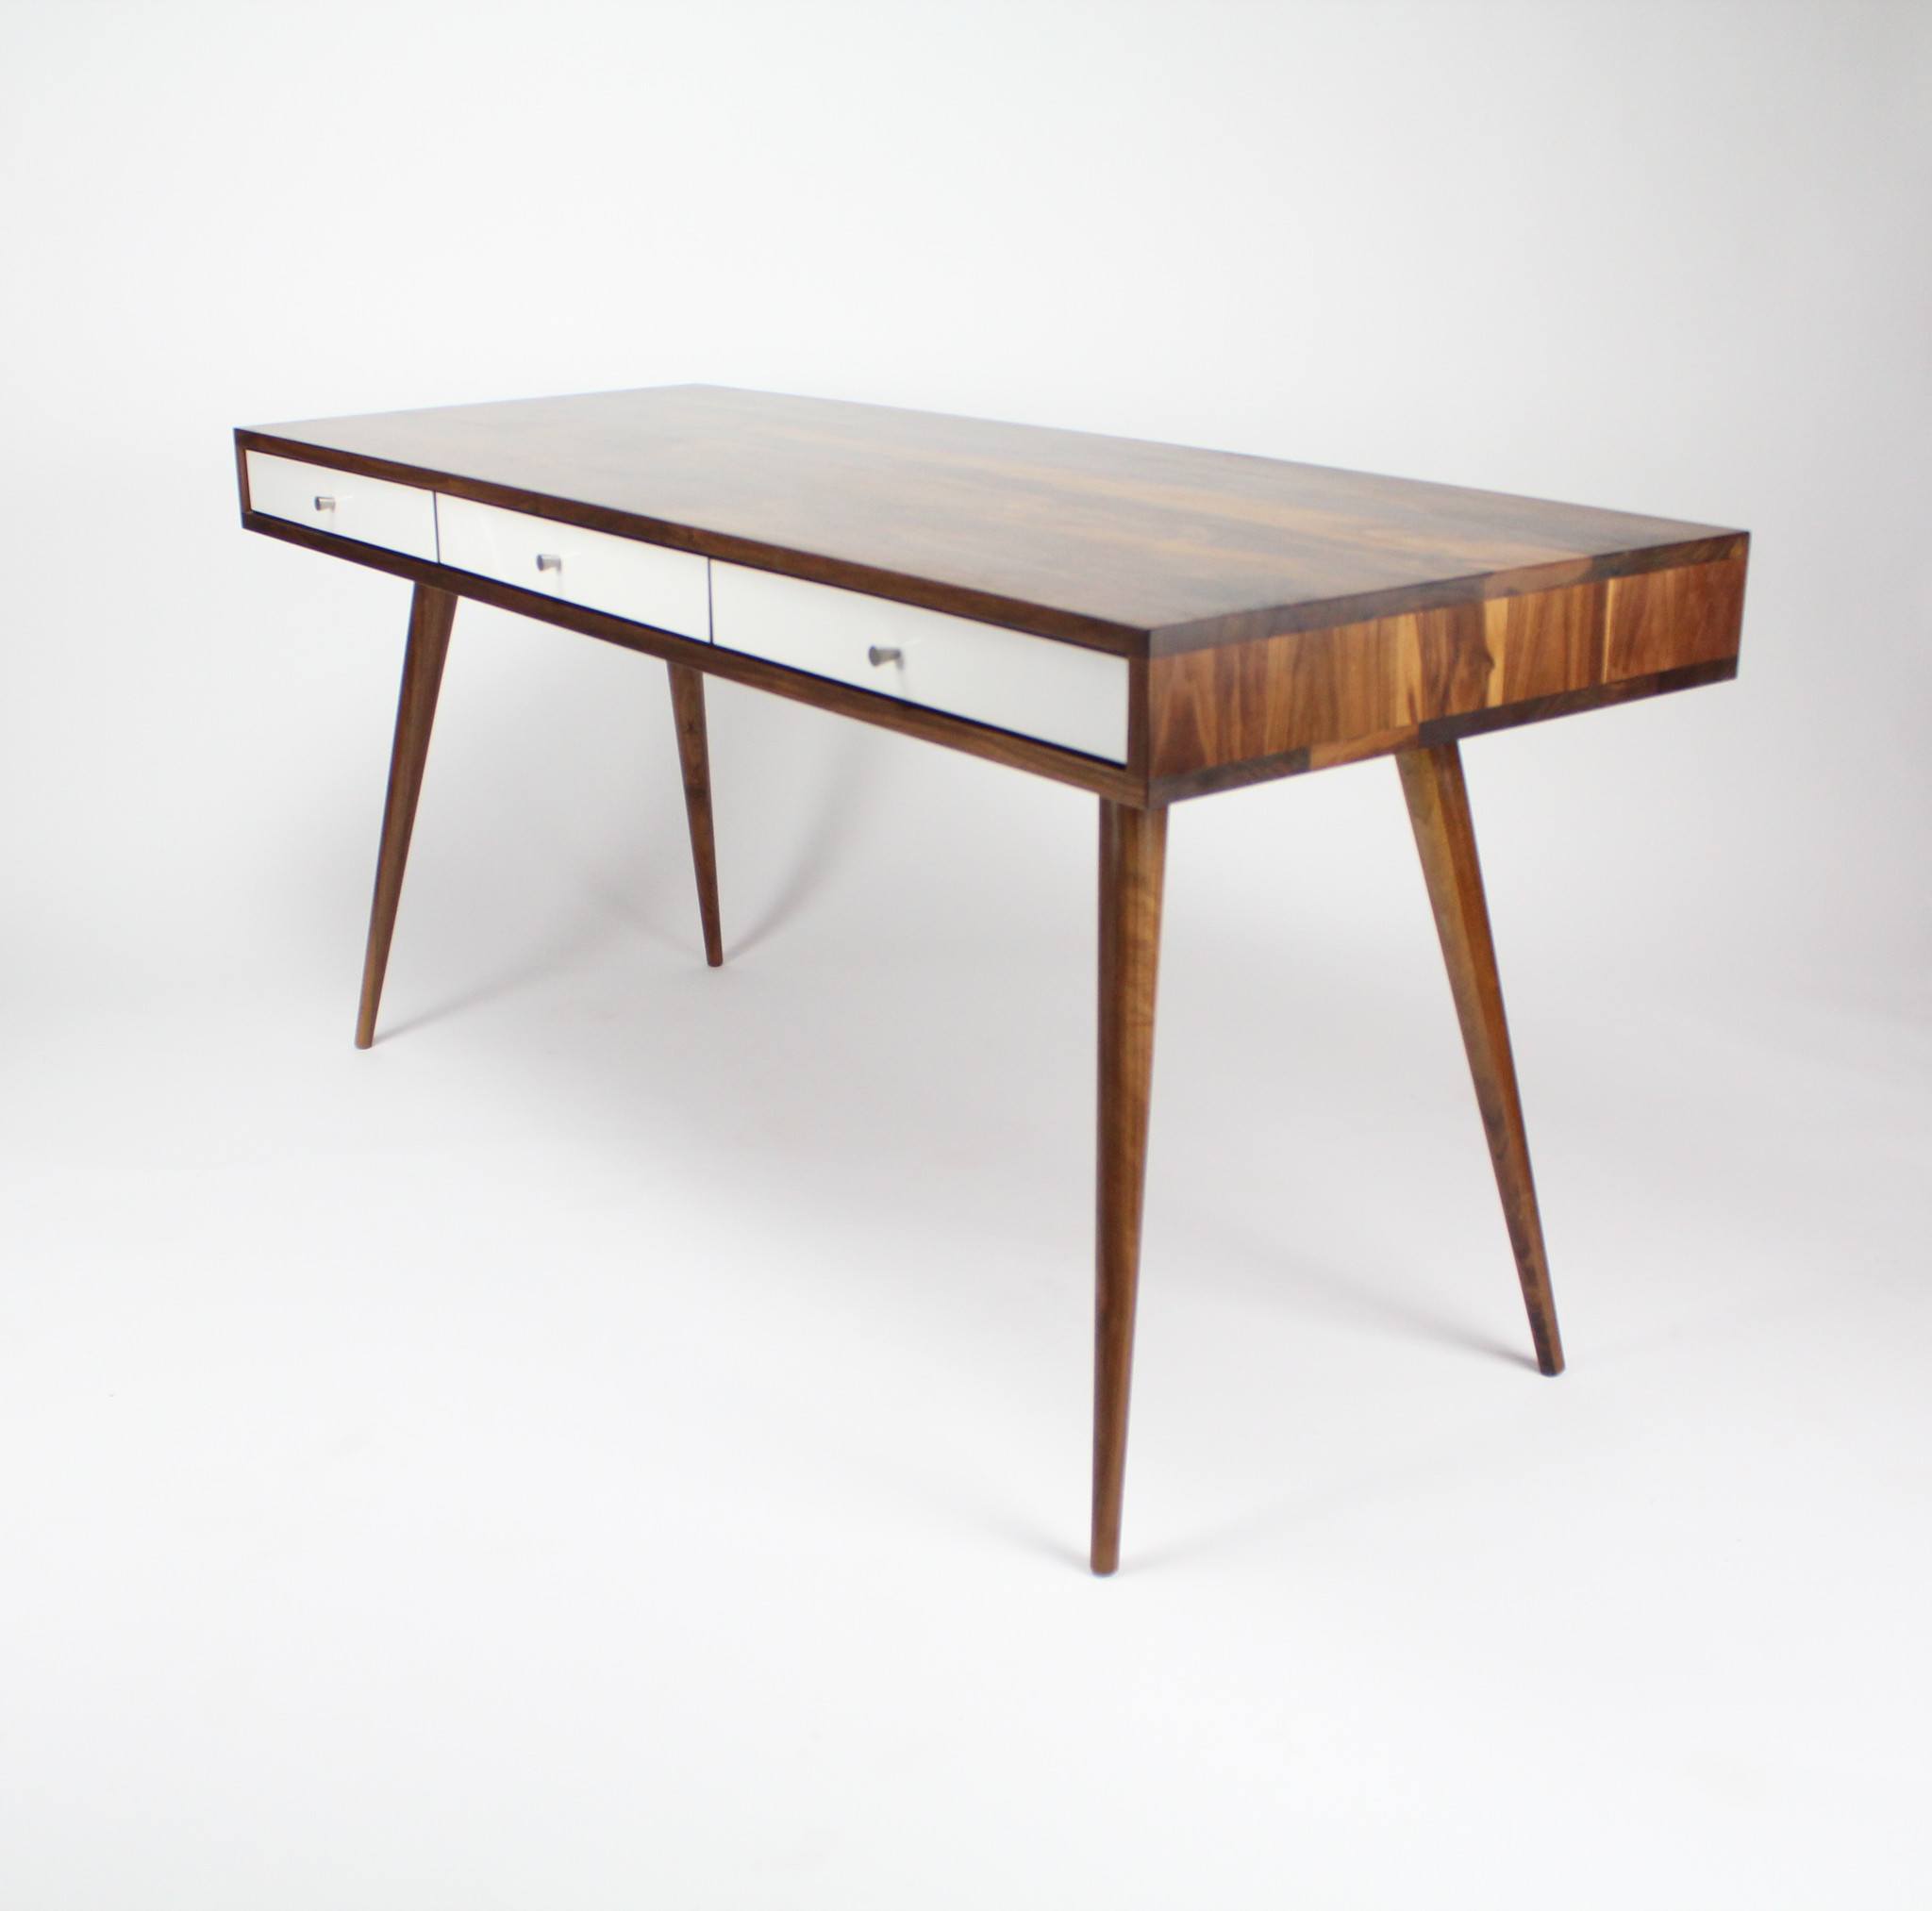 Mid Century Desk with Cord Management - JeremiahCollection - 2